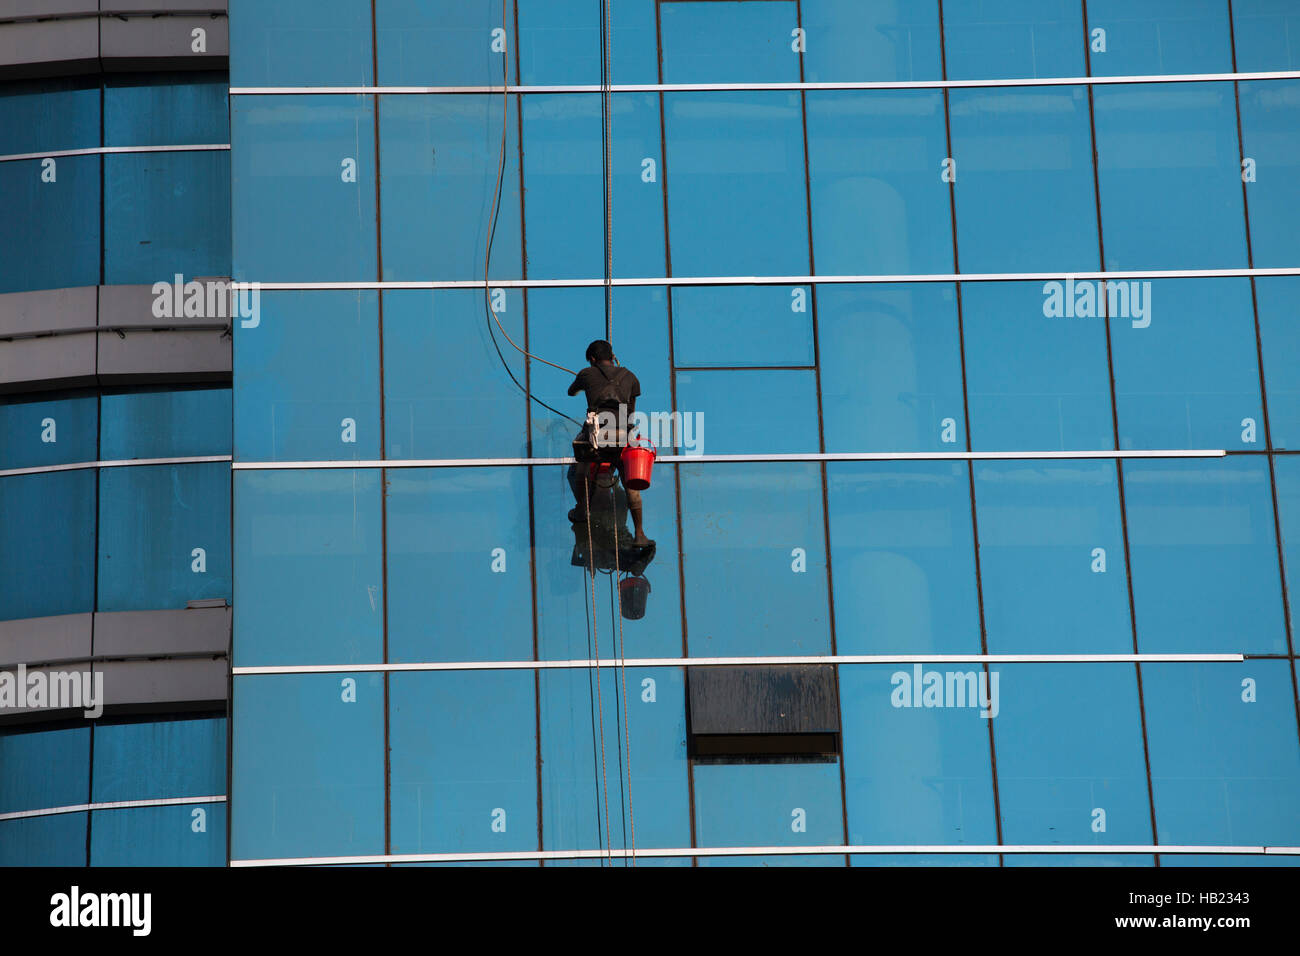 Dhaka, Bangladesh. 3rd Dec, 2016.  A labor clean the glass-wall of a high-rise building in Dhaka, Bangladesh on December 03, 2016. He is working a risky job and didn't use proper safety. Dhaka is the center of economic, cultural and political life in Bangladesh. Credit:  zakir hossain chowdhury zakir/Alamy Live News Stock Photo